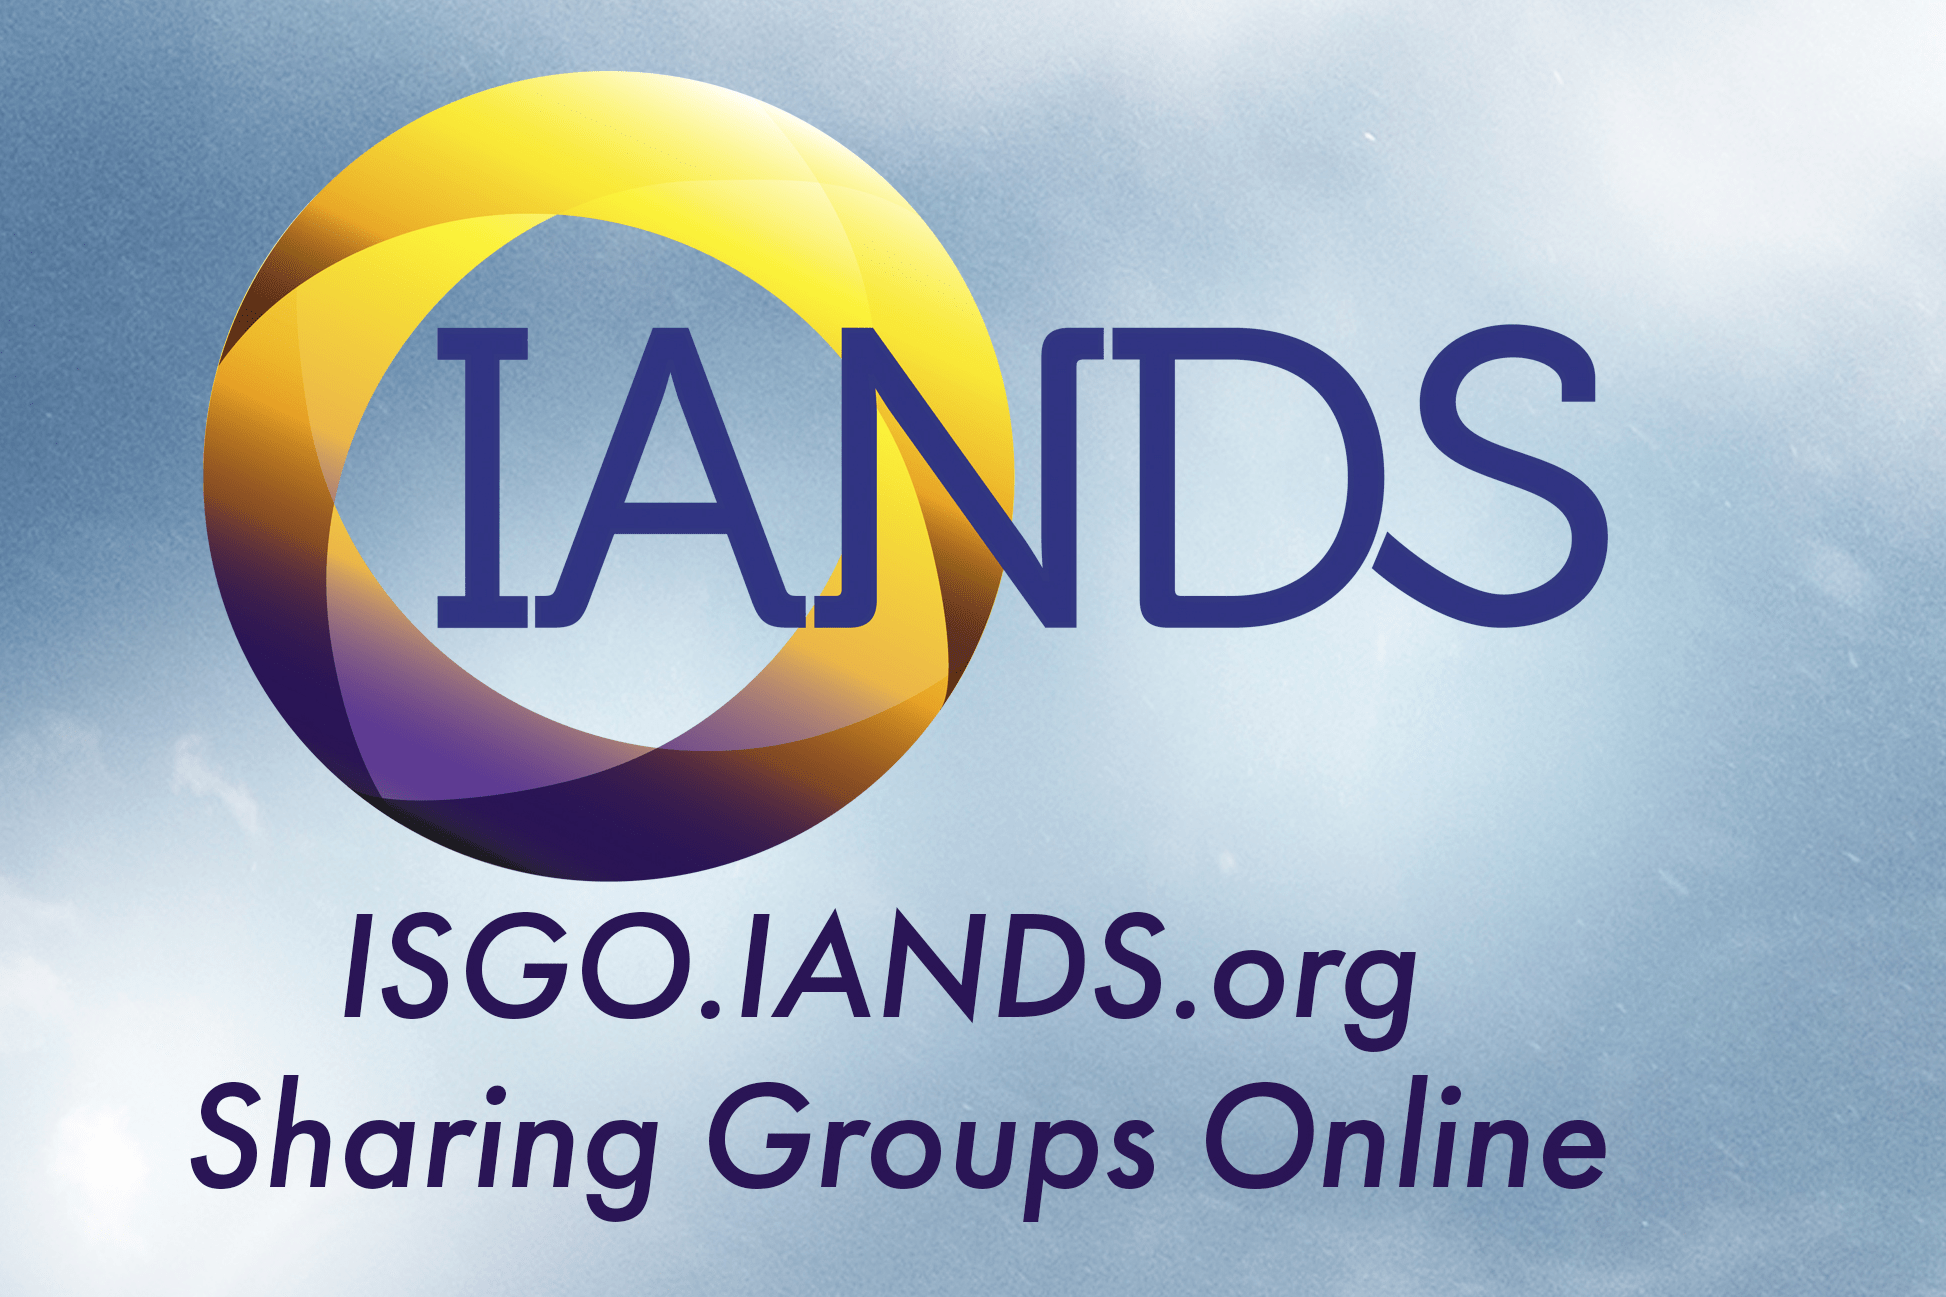 IANDS 2022 Conference Live and Online Timeless Oneness The